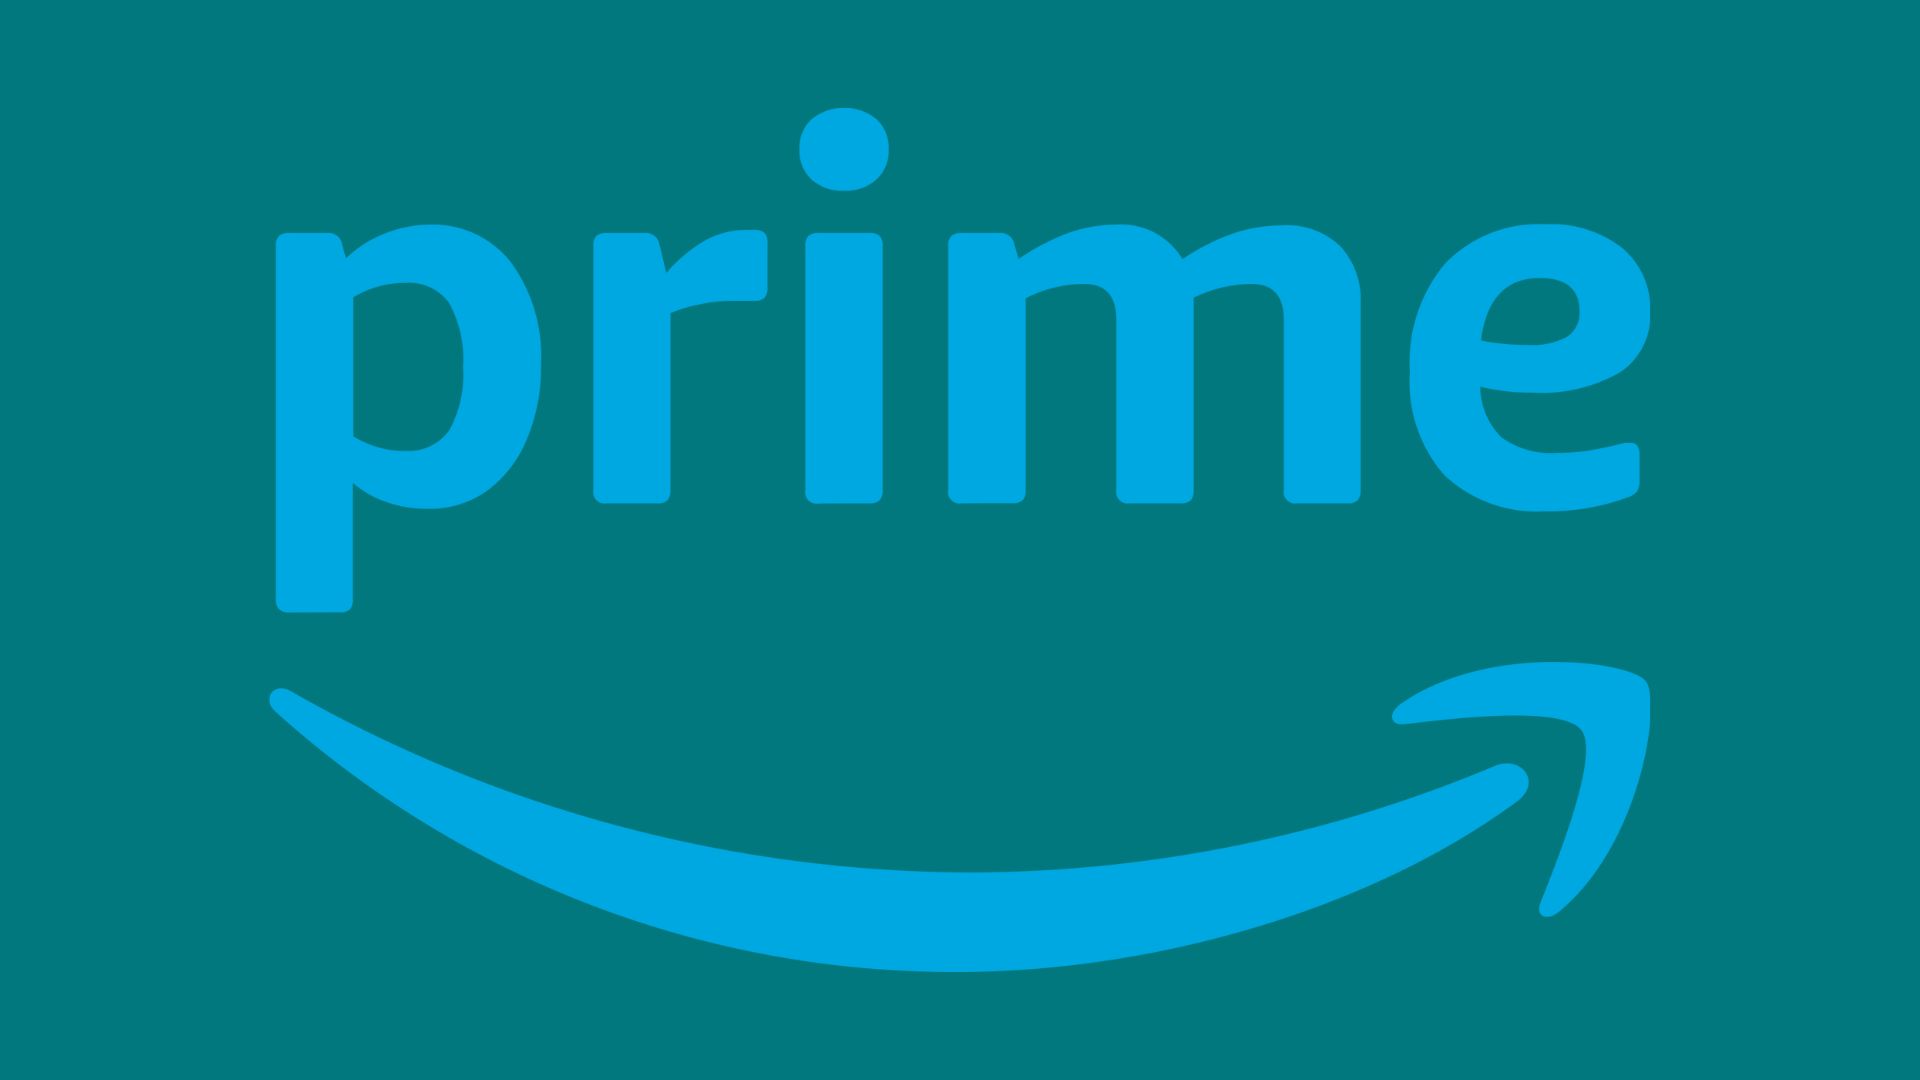 Amazon announces two days of deals in October - but don't call it Prime Day